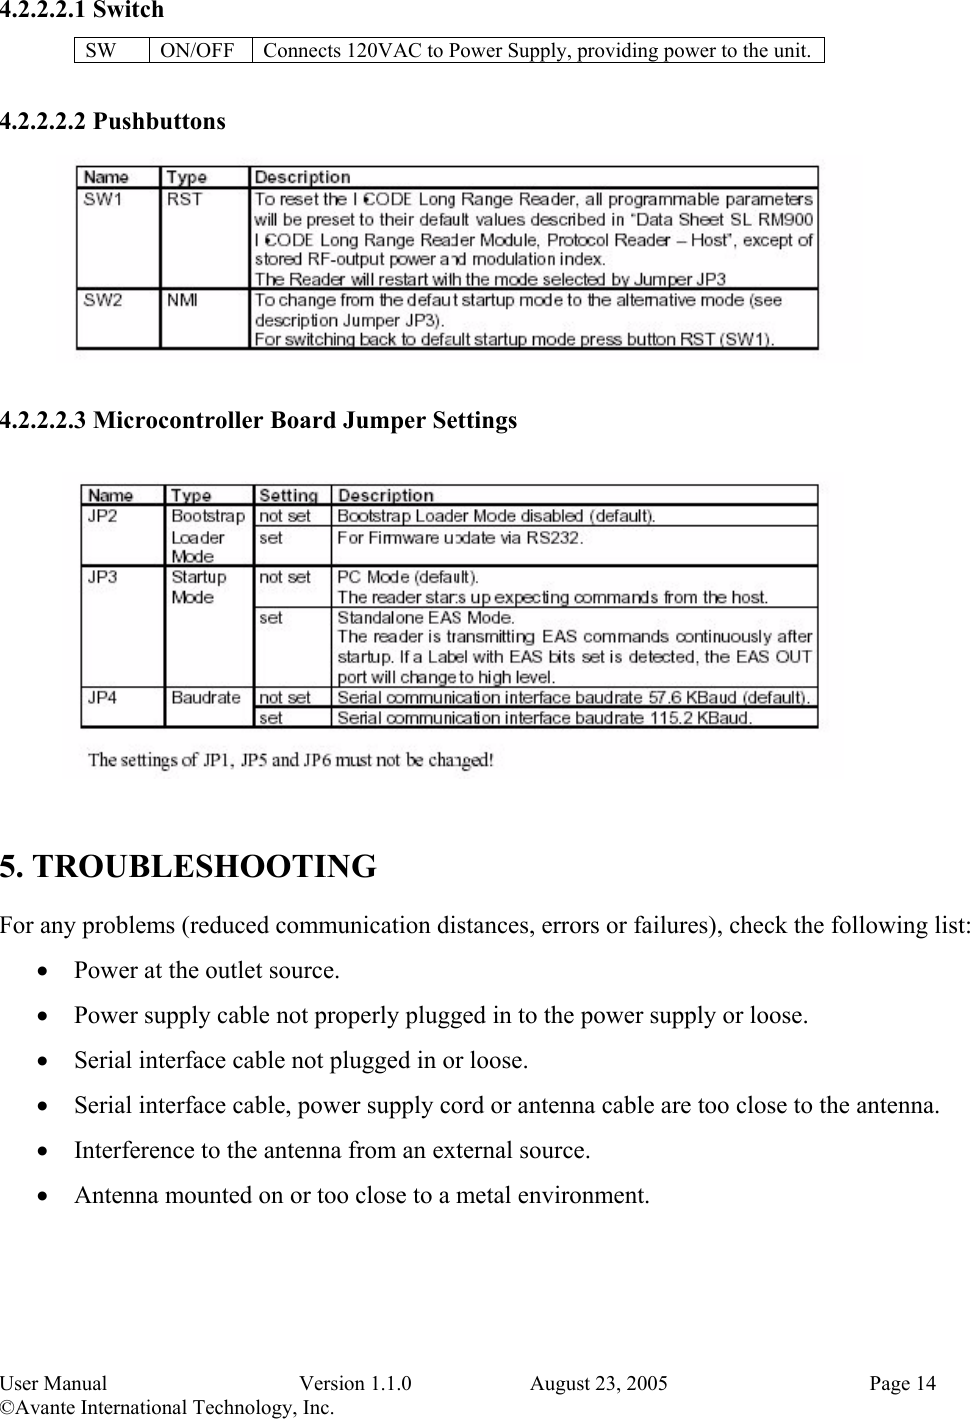 User Manual   Version 1.1.0   August 23, 2005    Page 14 ©Avante International Technology, Inc.   4.2.2.2.1 Switch SW  ON/OFF  Connects 120VAC to Power Supply, providing power to the unit.  4.2.2.2.2 Pushbuttons  4.2.2.2.3 Microcontroller Board Jumper Settings  5. TROUBLESHOOTING For any problems (reduced communication distances, errors or failures), check the following list: •  Power at the outlet source. •  Power supply cable not properly plugged in to the power supply or loose. •  Serial interface cable not plugged in or loose. •  Serial interface cable, power supply cord or antenna cable are too close to the antenna. •  Interference to the antenna from an external source.   •  Antenna mounted on or too close to a metal environment. 